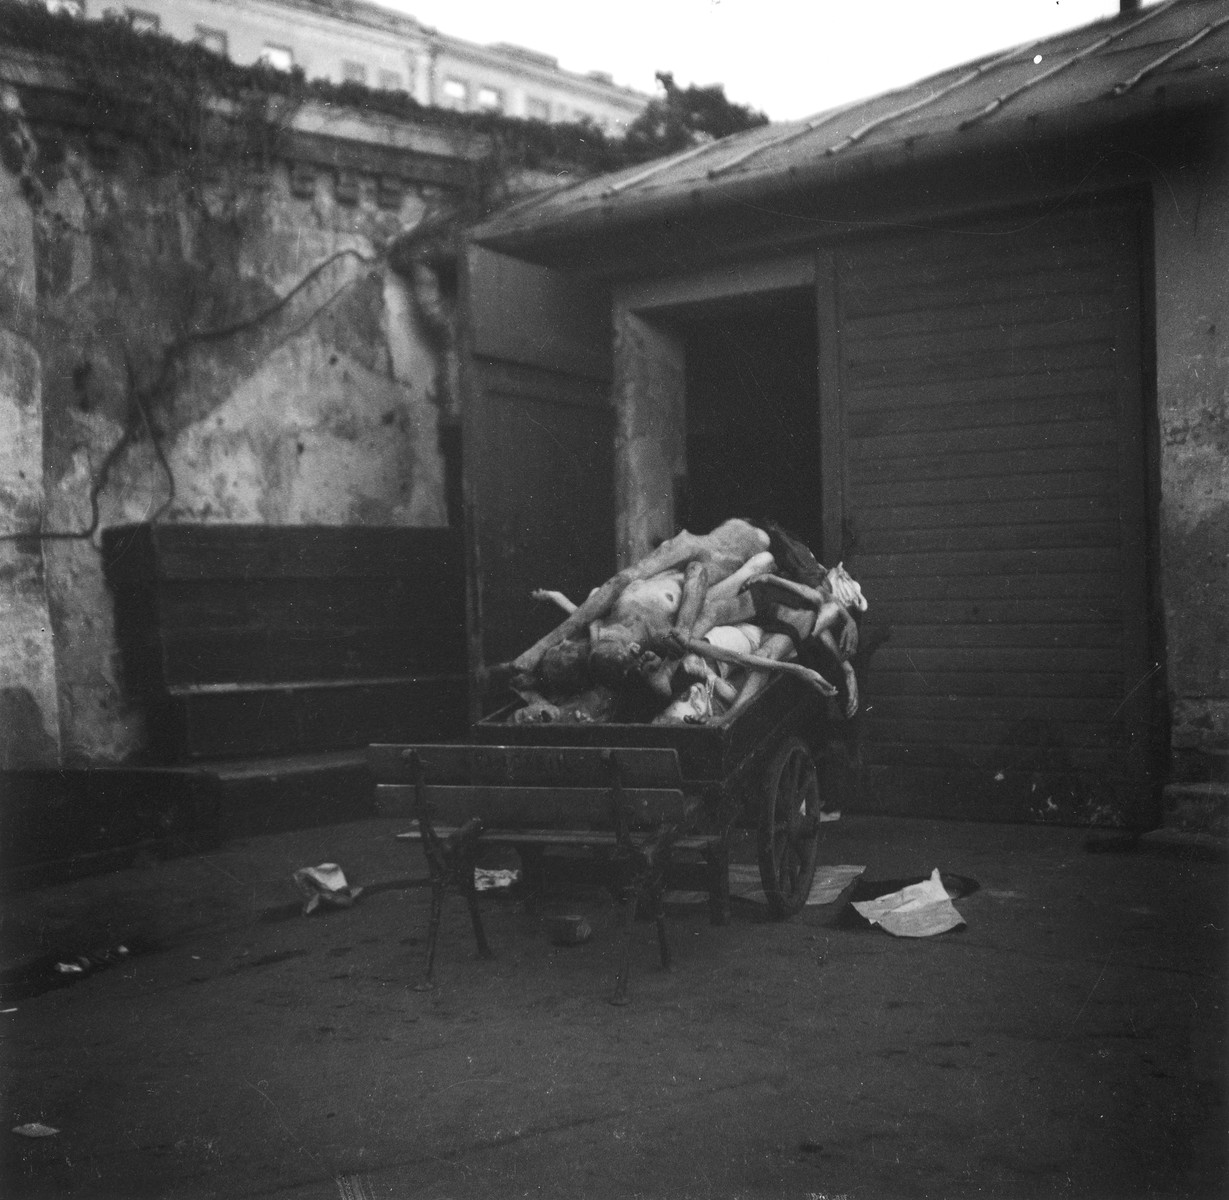 A cart filled with corpses of Jews who died in the Warsaw ghetto, awaiting mass burial at the Jewish cemetery.

Joest's original caption reads: "Most of the dead were brought to mass graves with no covering at all."